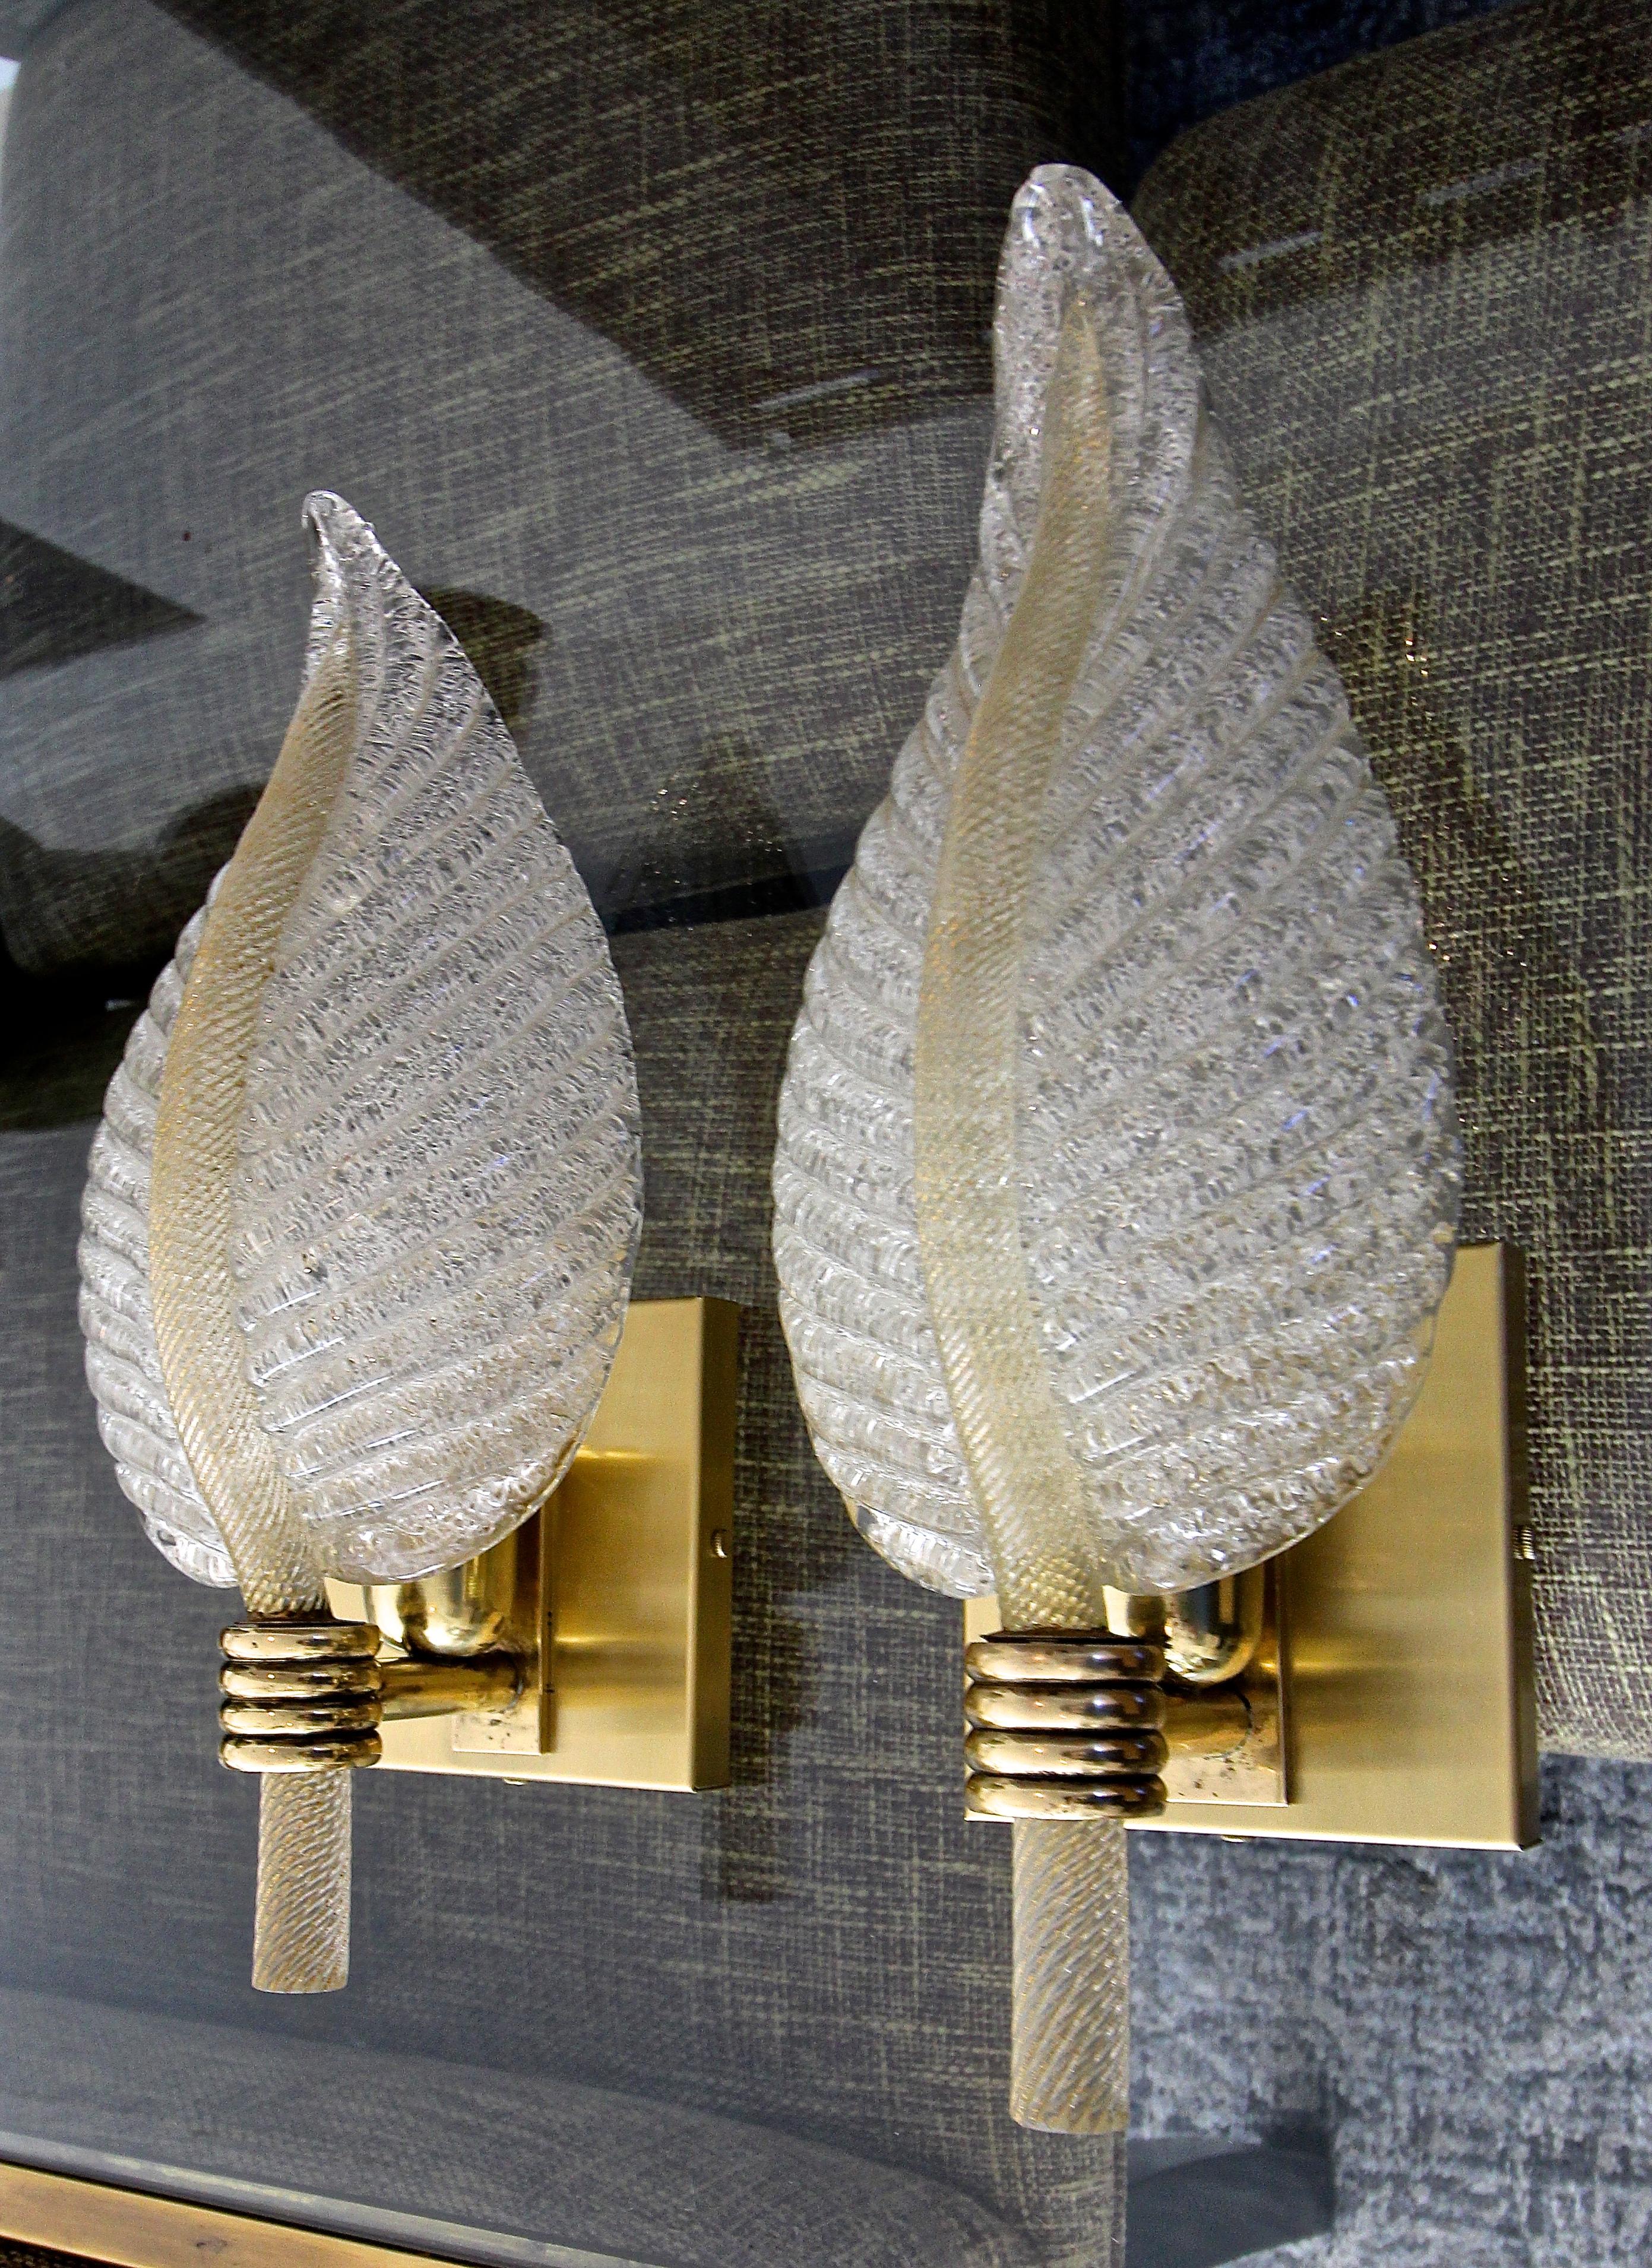 Pair of Murano glass wall sconces in leaf shape form, manufactured by Barovier & Toso in the early 1950s. Finely twisted glass stem infused with gold flecks and the reverse side of the leaf in the 